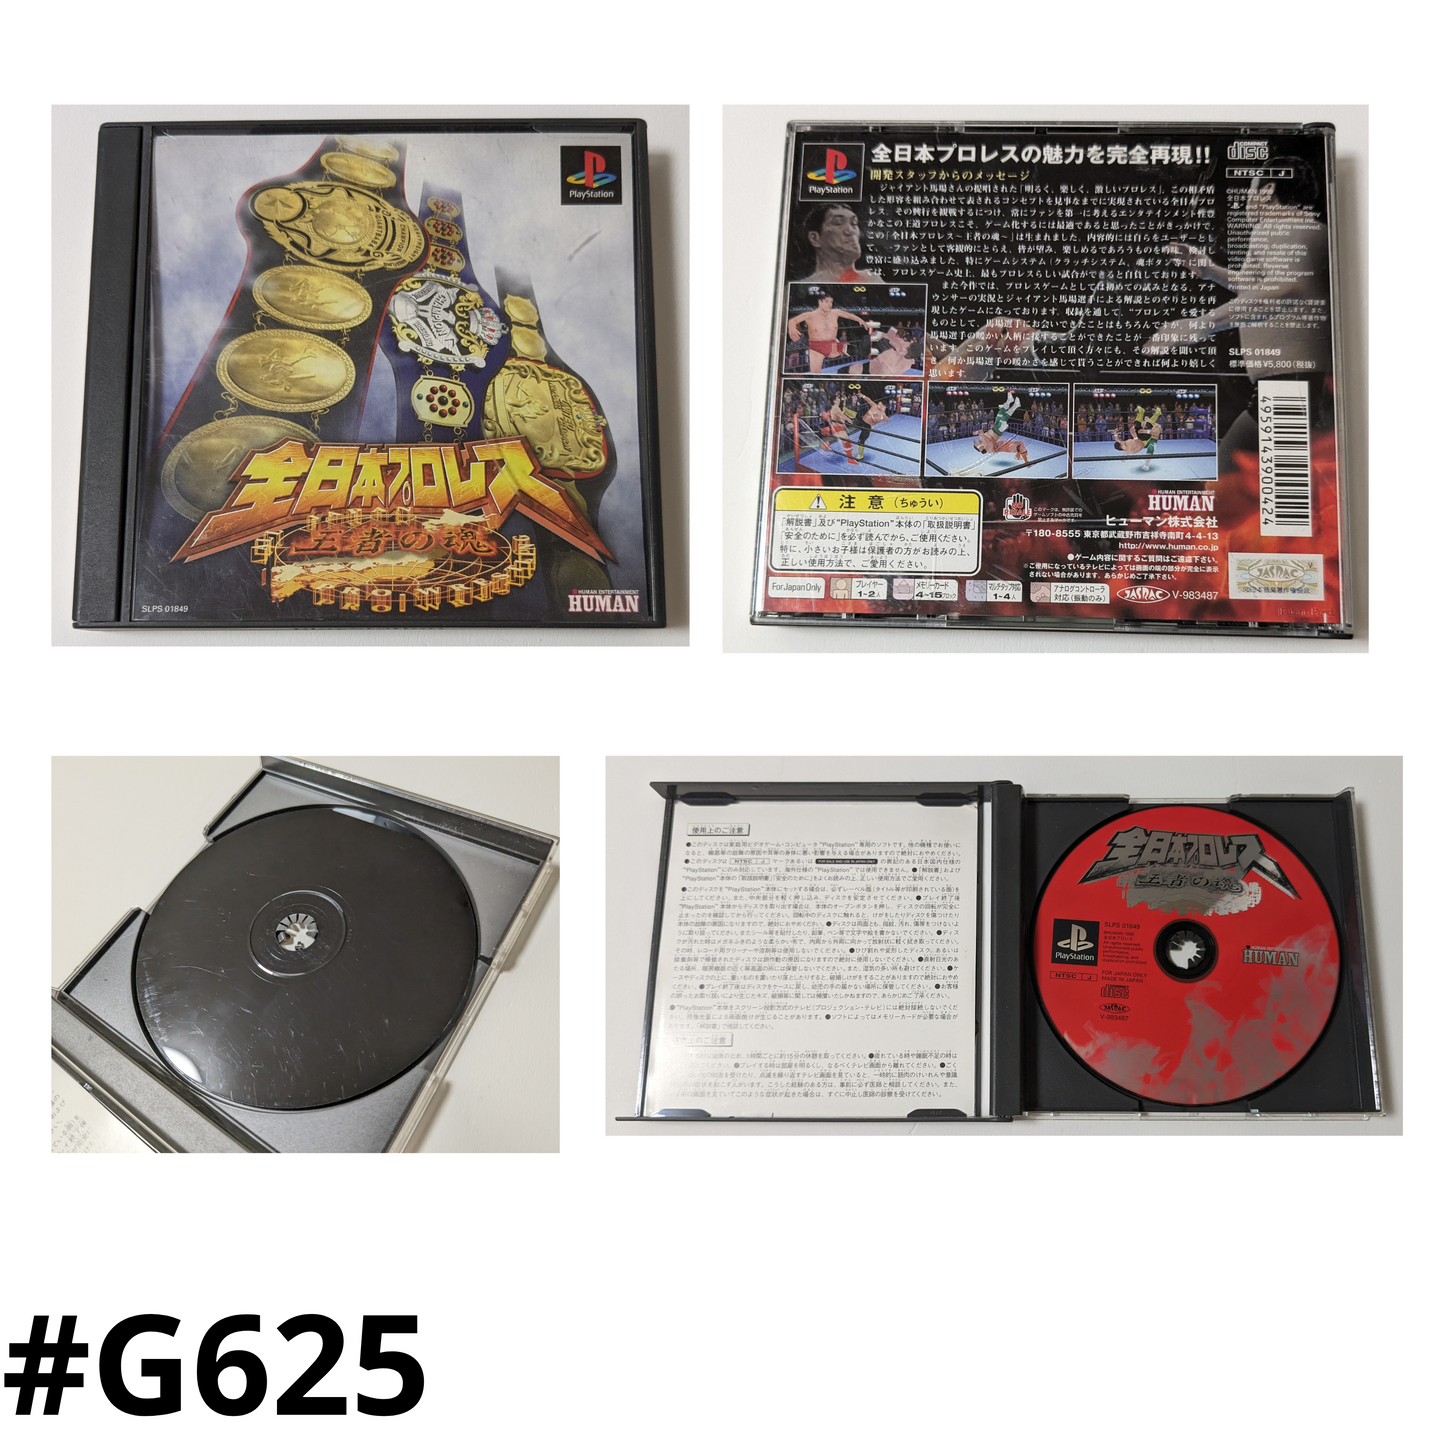 Nippon Pro Wrestling: Soul of the Champion | PlayStation 1 | Japanese